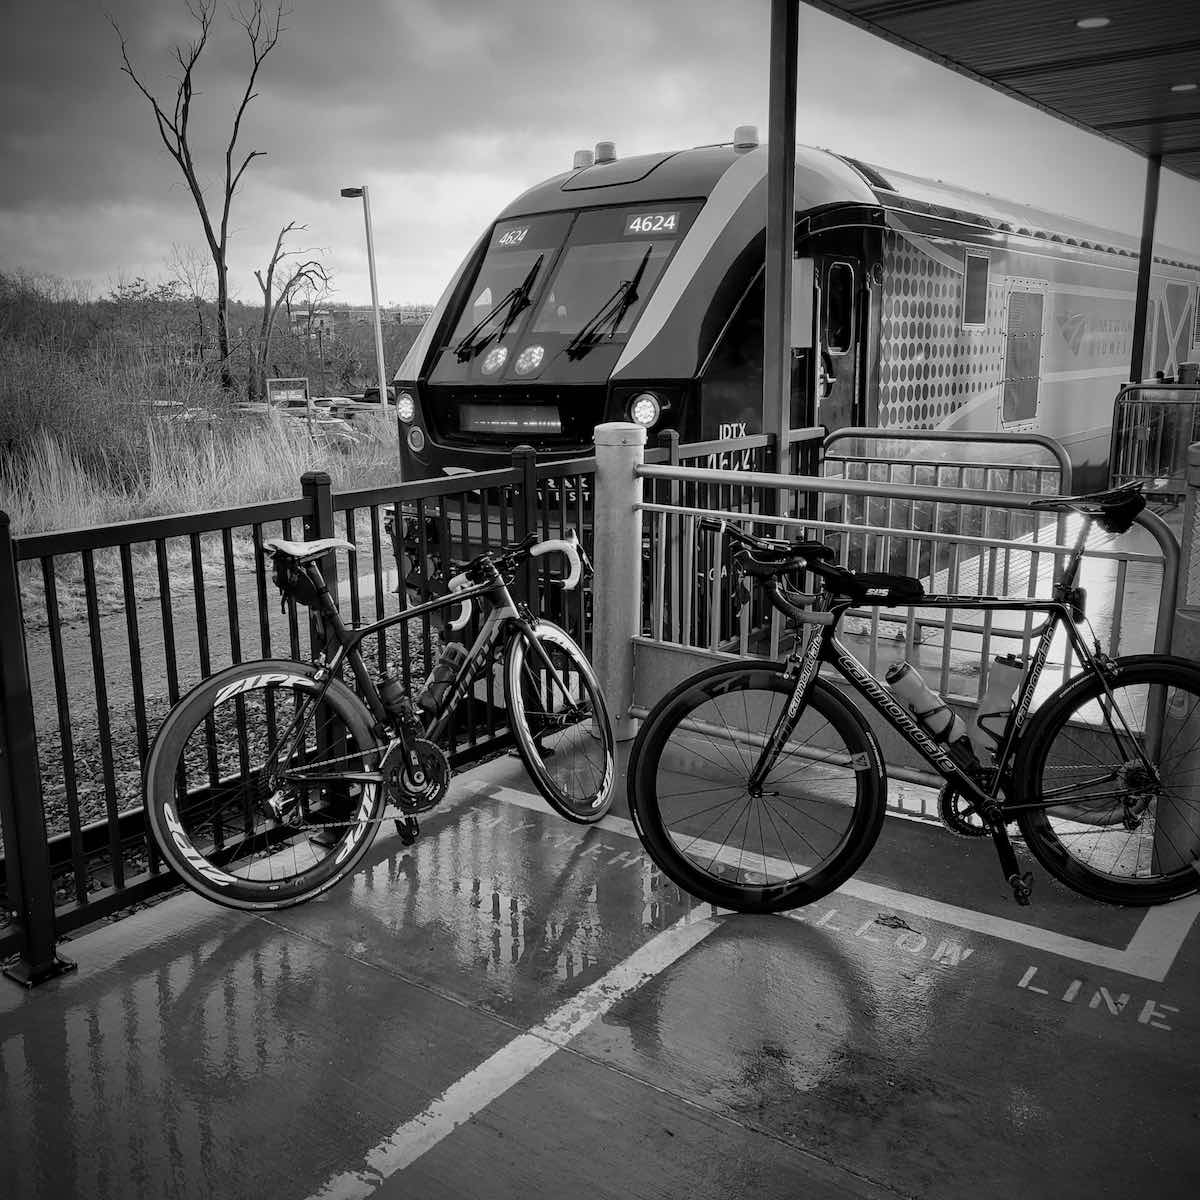 bikerumor pic of the day two bicycles lean against a metal railing on a train platform with an amtrak train behind them, the photo is in black and white and the ground is wet from rain.